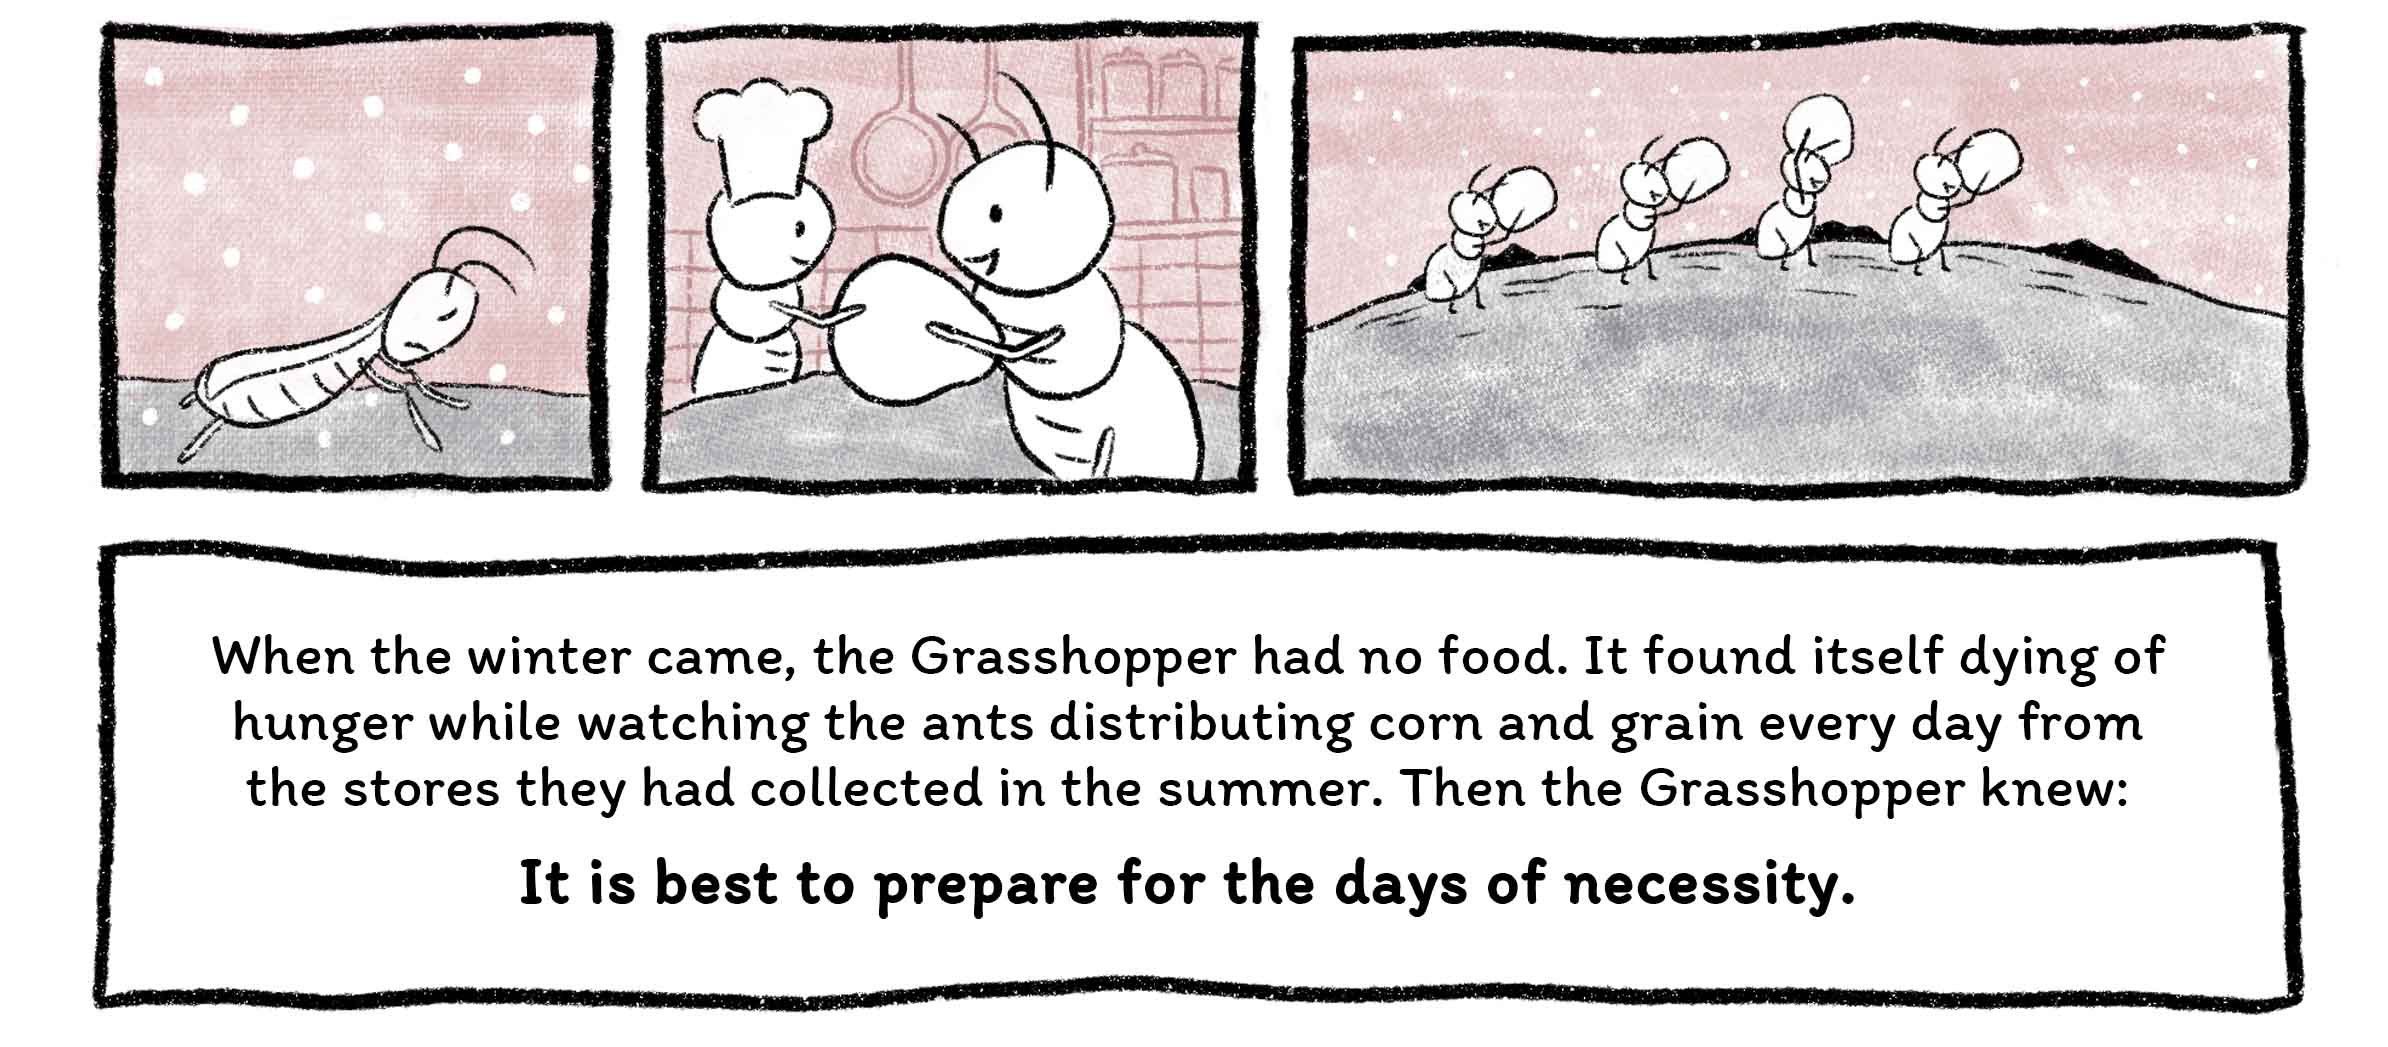 When the winter came, the Grasshopper had no food. It found itself dying of hunger while watching the ants distributing corn and grain every day from the stores they had collected in the summer. Then the Grasshopper knew: It is best to prepare for the days of necessity.